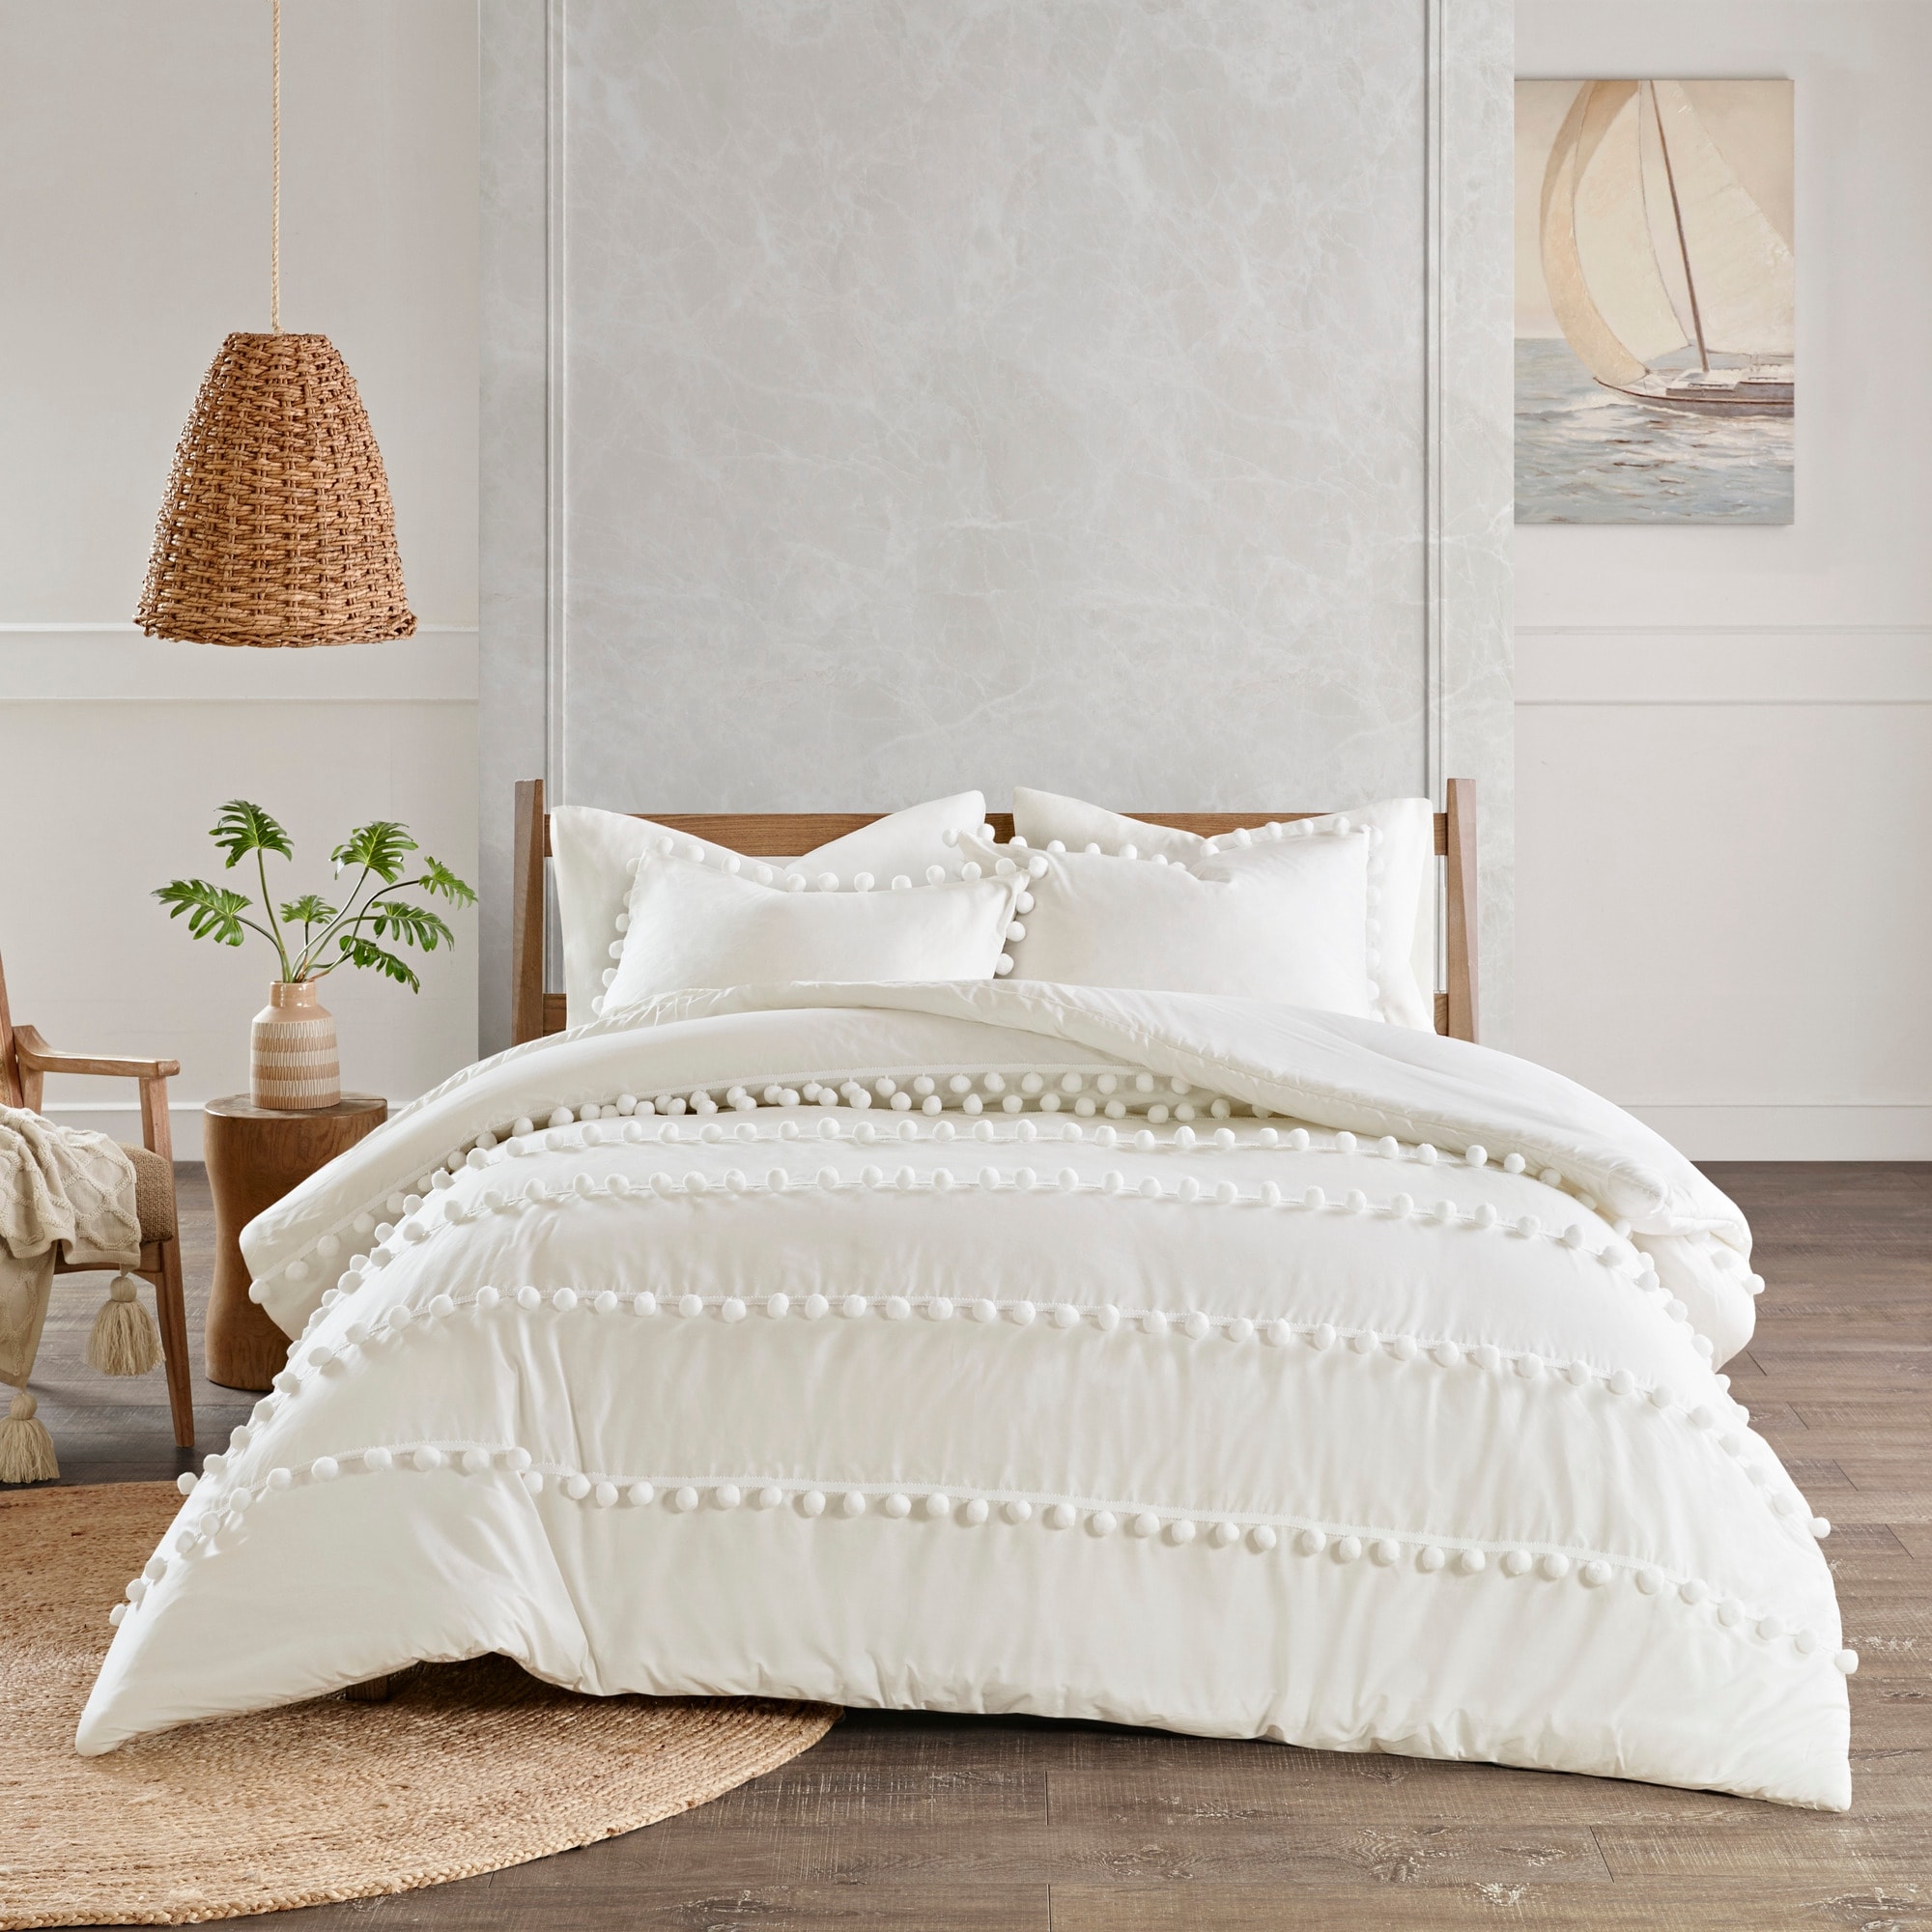 https://ak1.ostkcdn.com/images/products/is/images/direct/3246bdbf63157a9892801521a5f85959e1ac9a15/Madison-Park-Tracie-Pom-Pom-Cotton-Comforter-Set.jpg